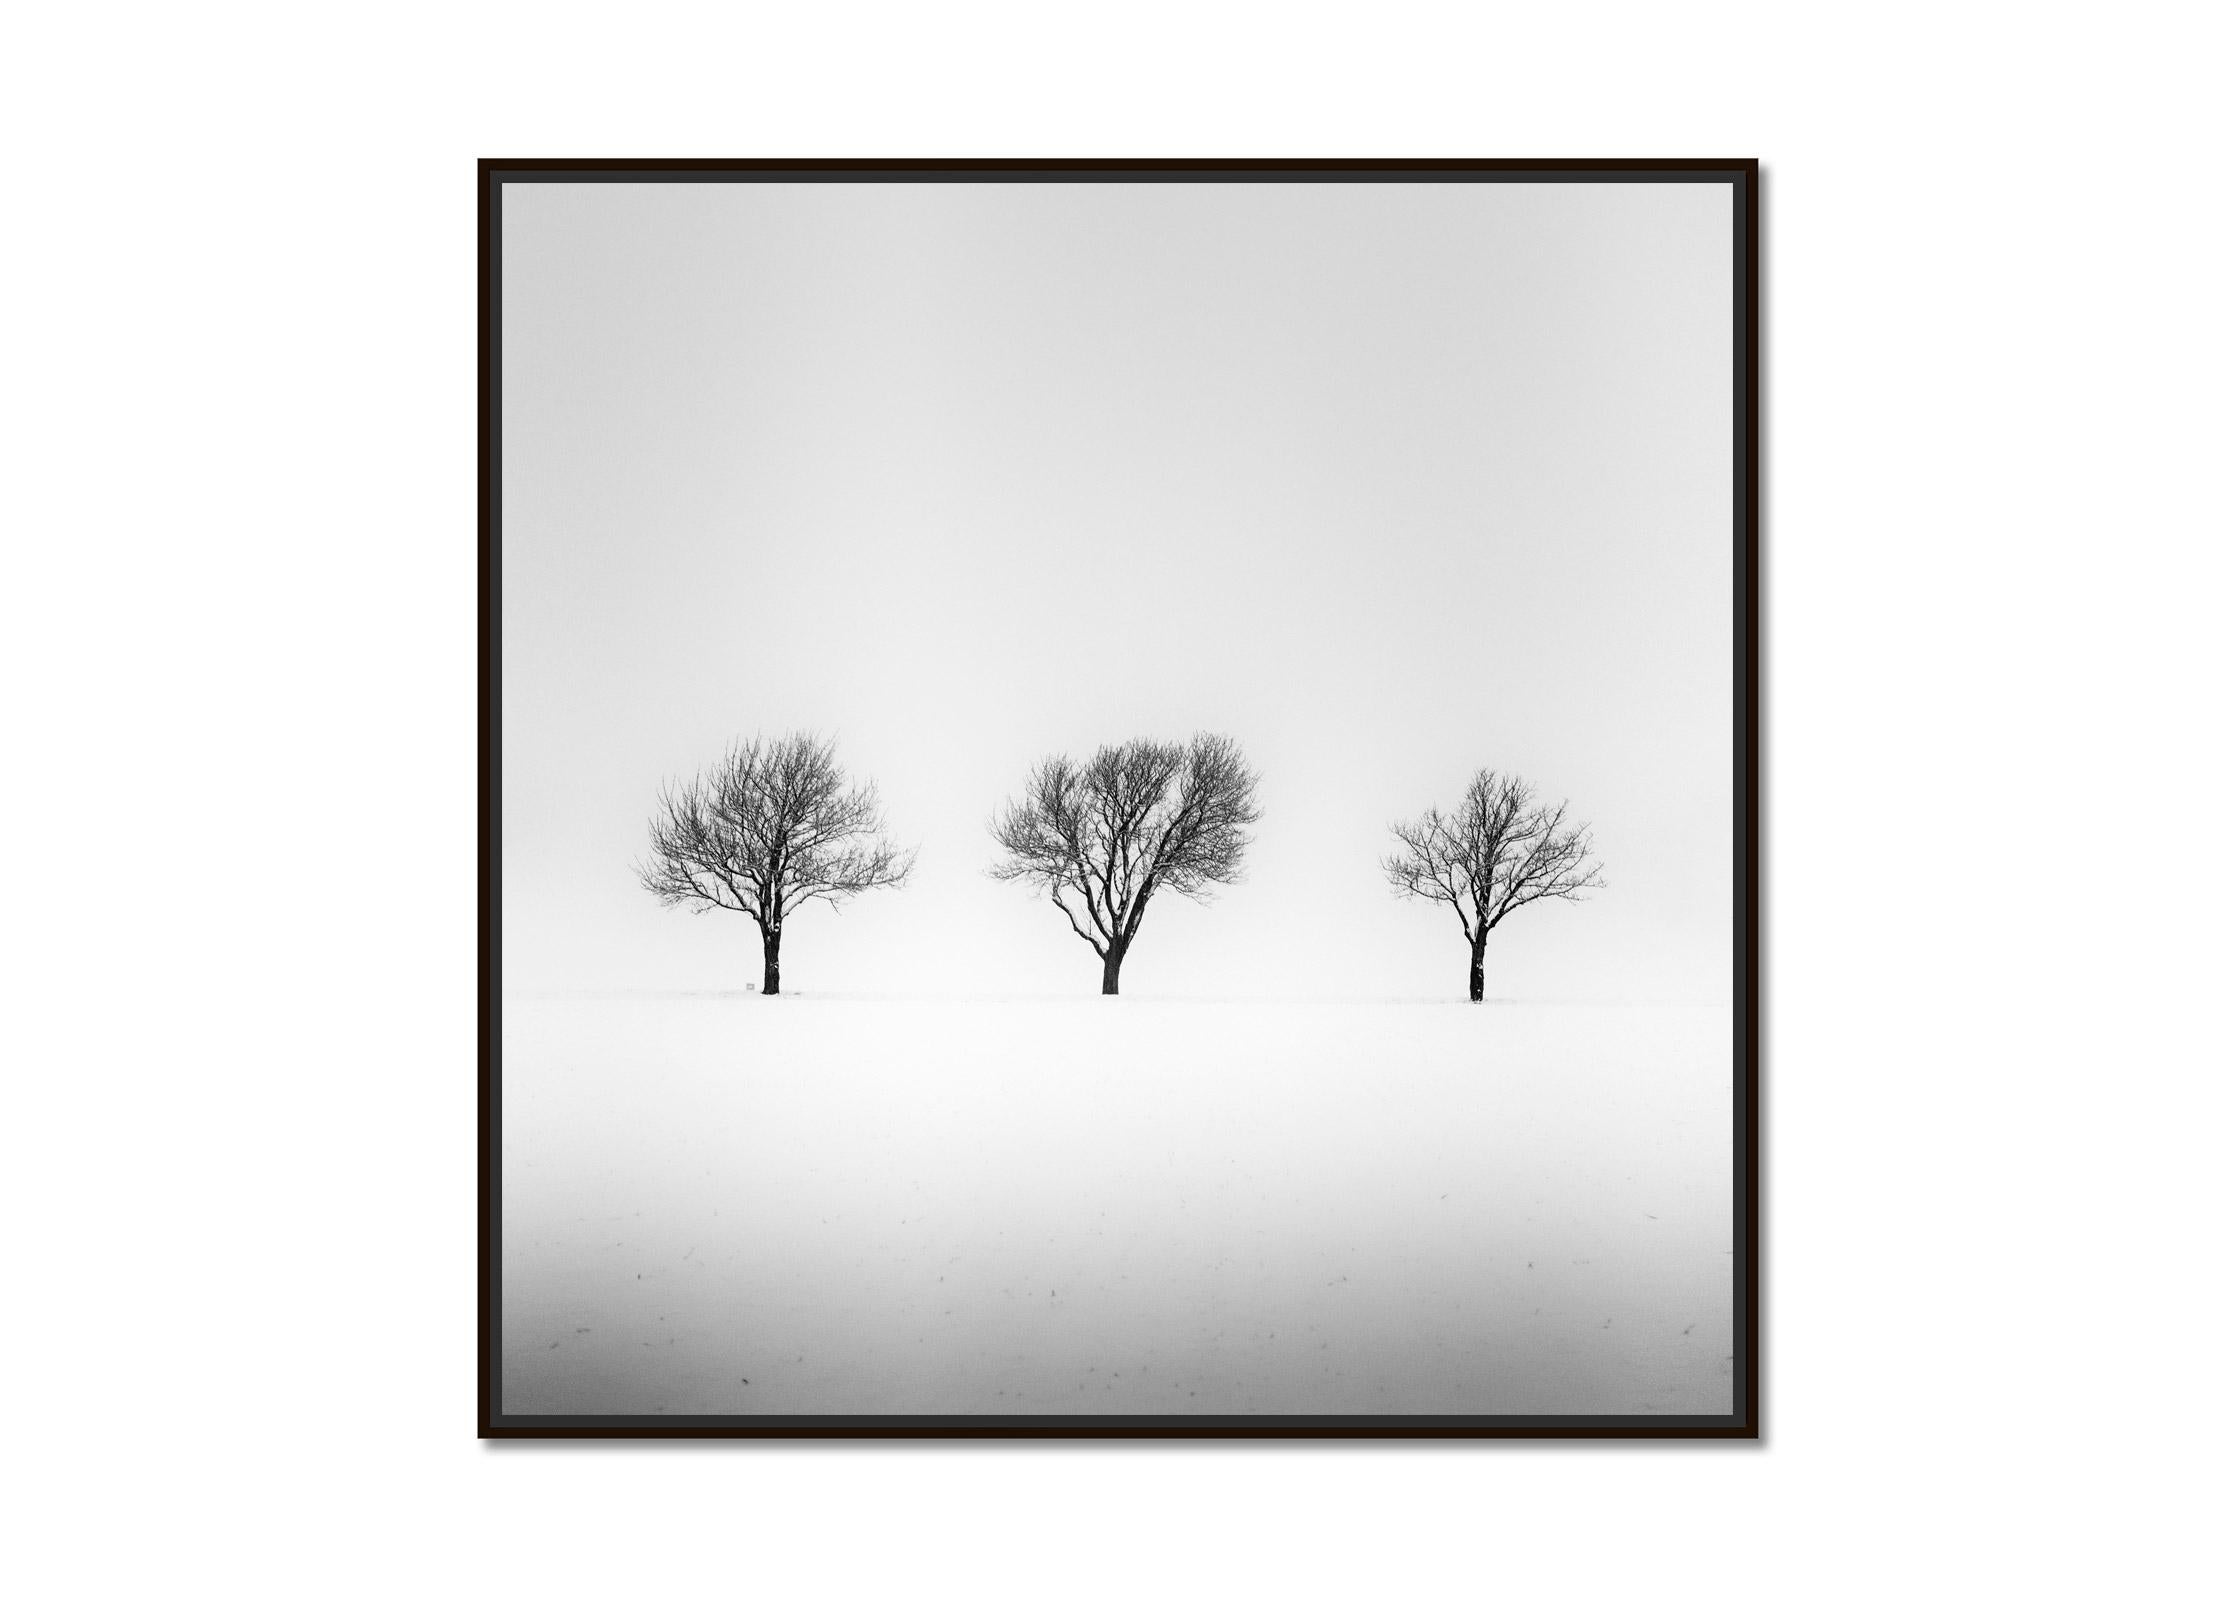 Trees in snowy Field, winterland, black and white photography, art, landscape - Photograph by Gerald Berghammer